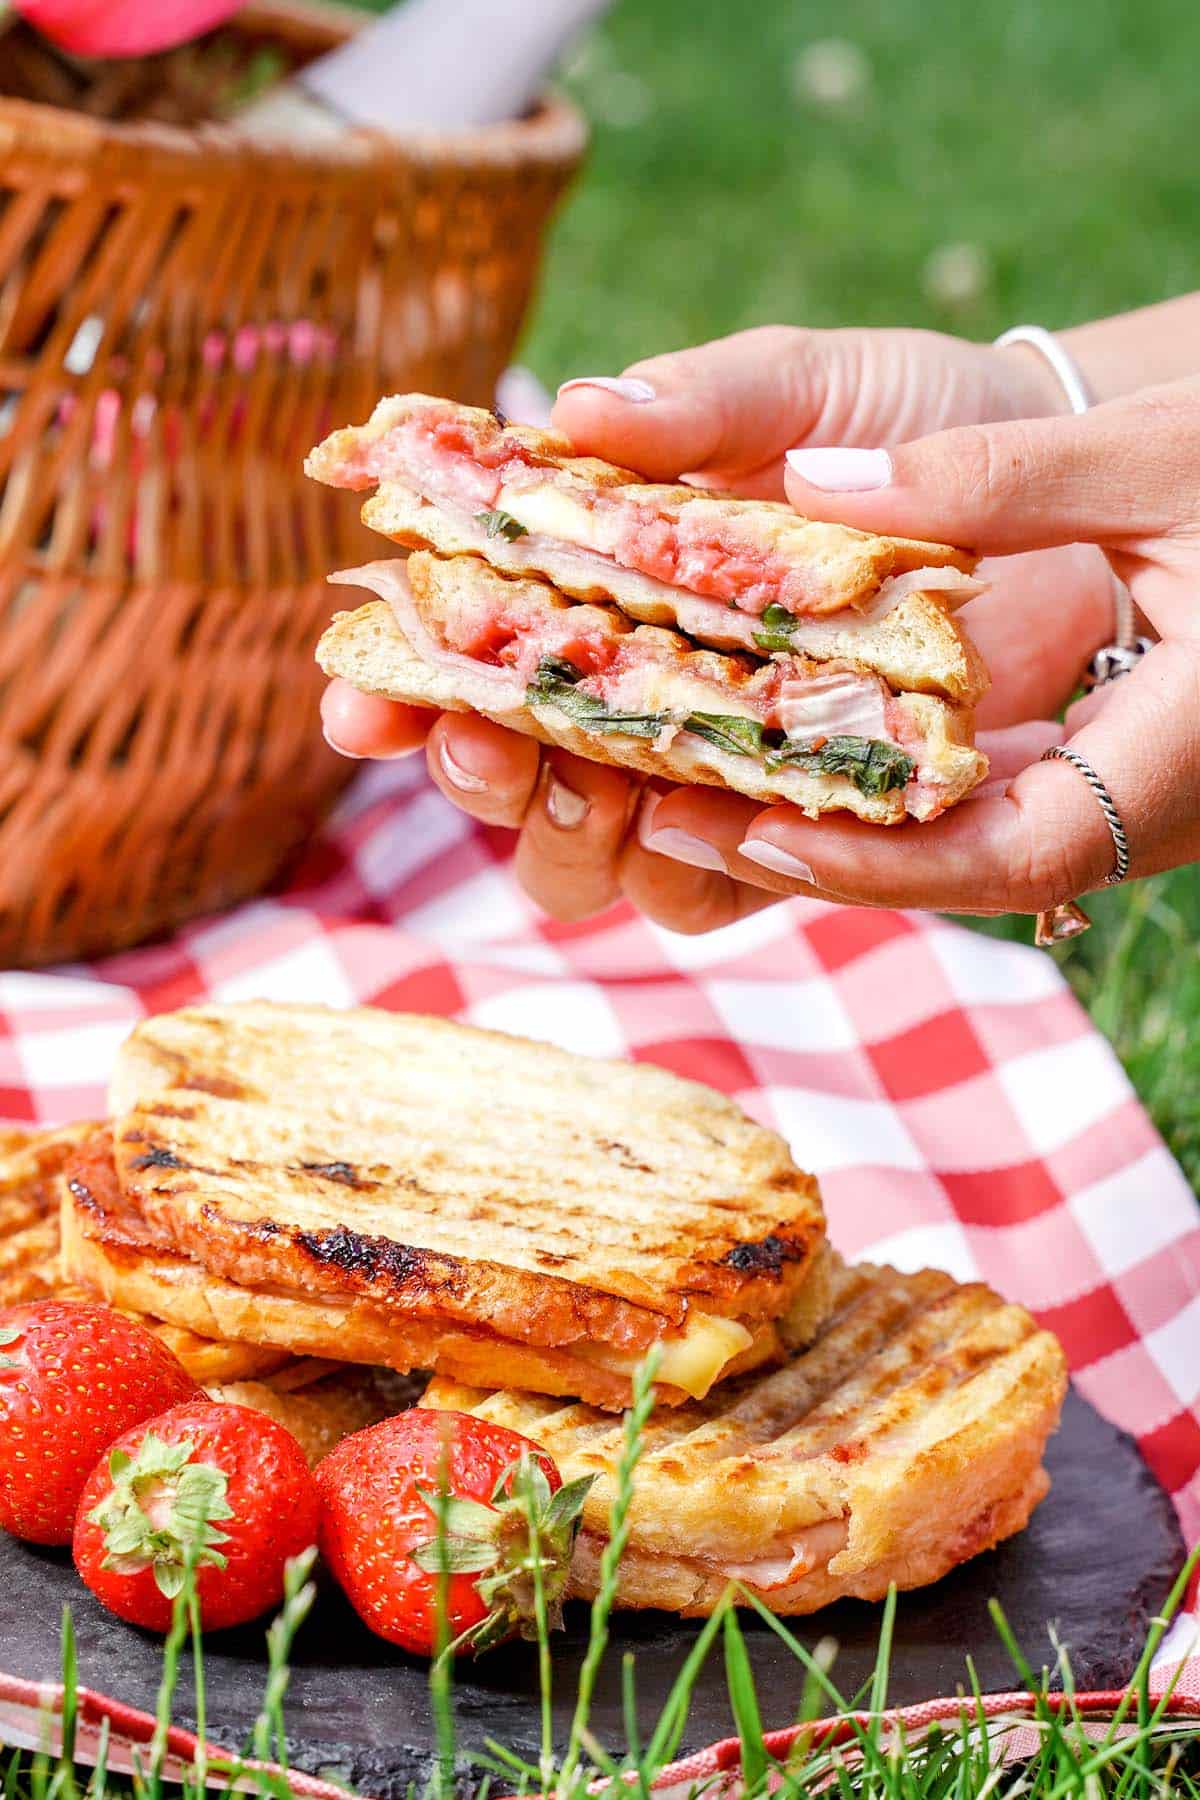 Holding Brie grilled cheese sandwich, outside.